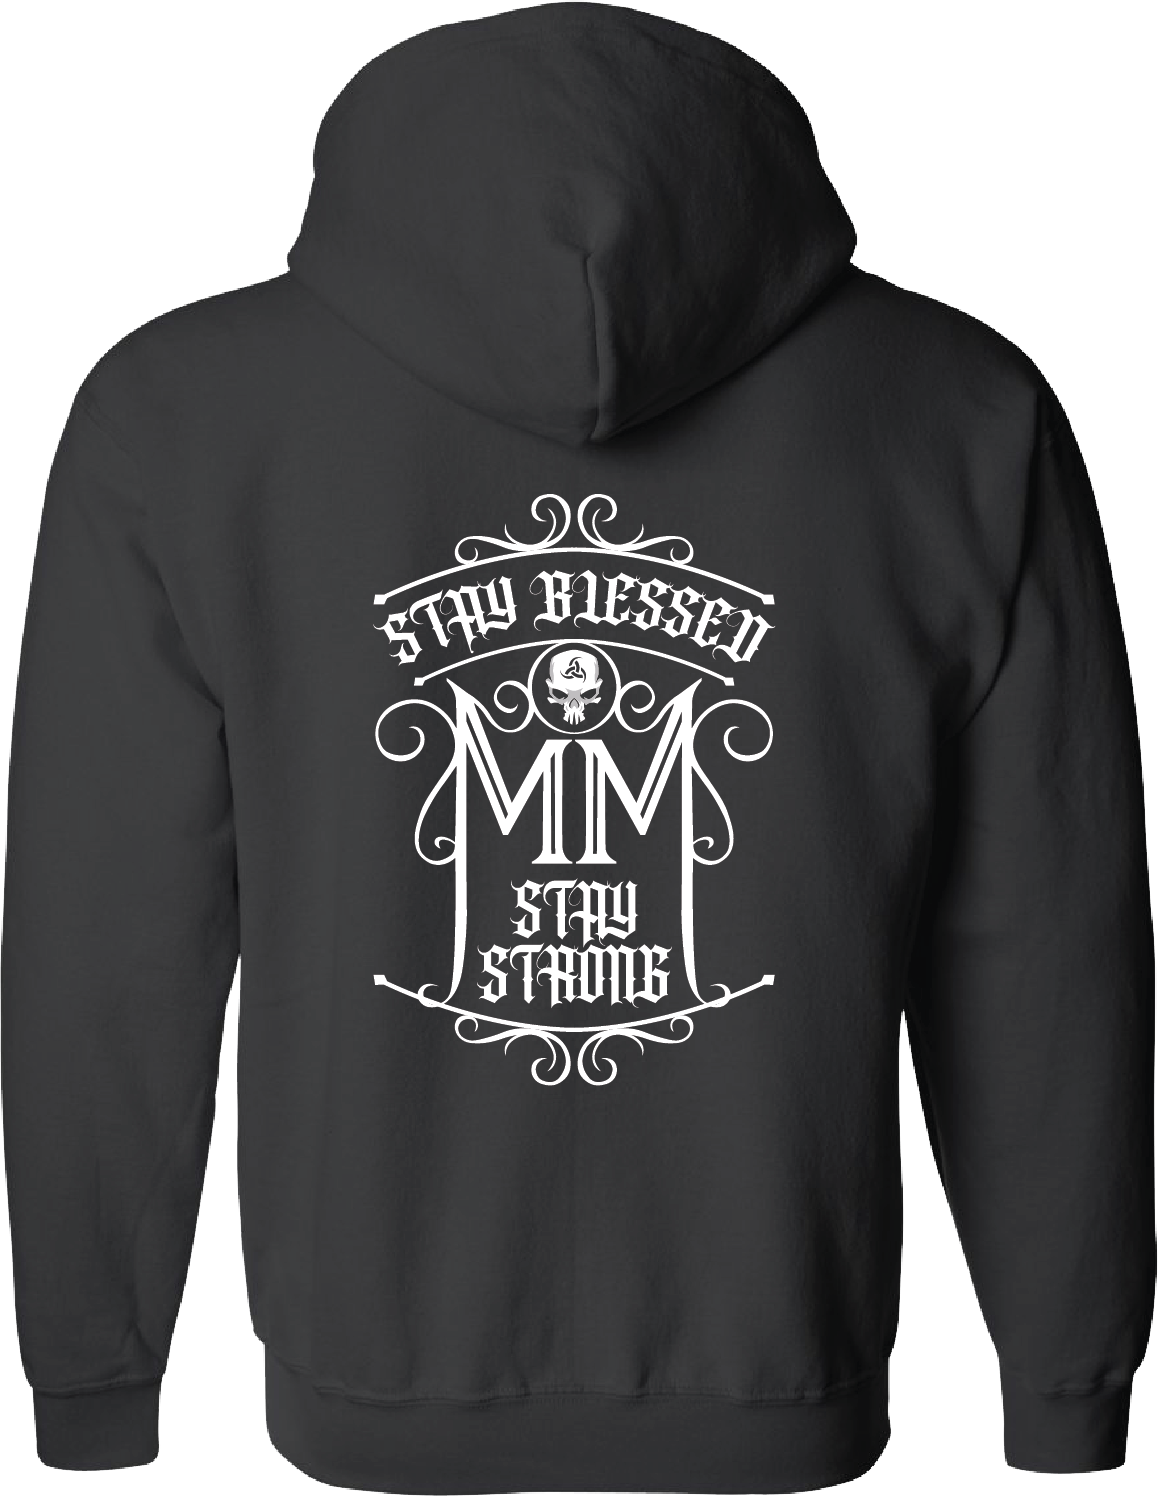 Womens Pullover Hoodie - Stay Blessed Stay Strong Gothic